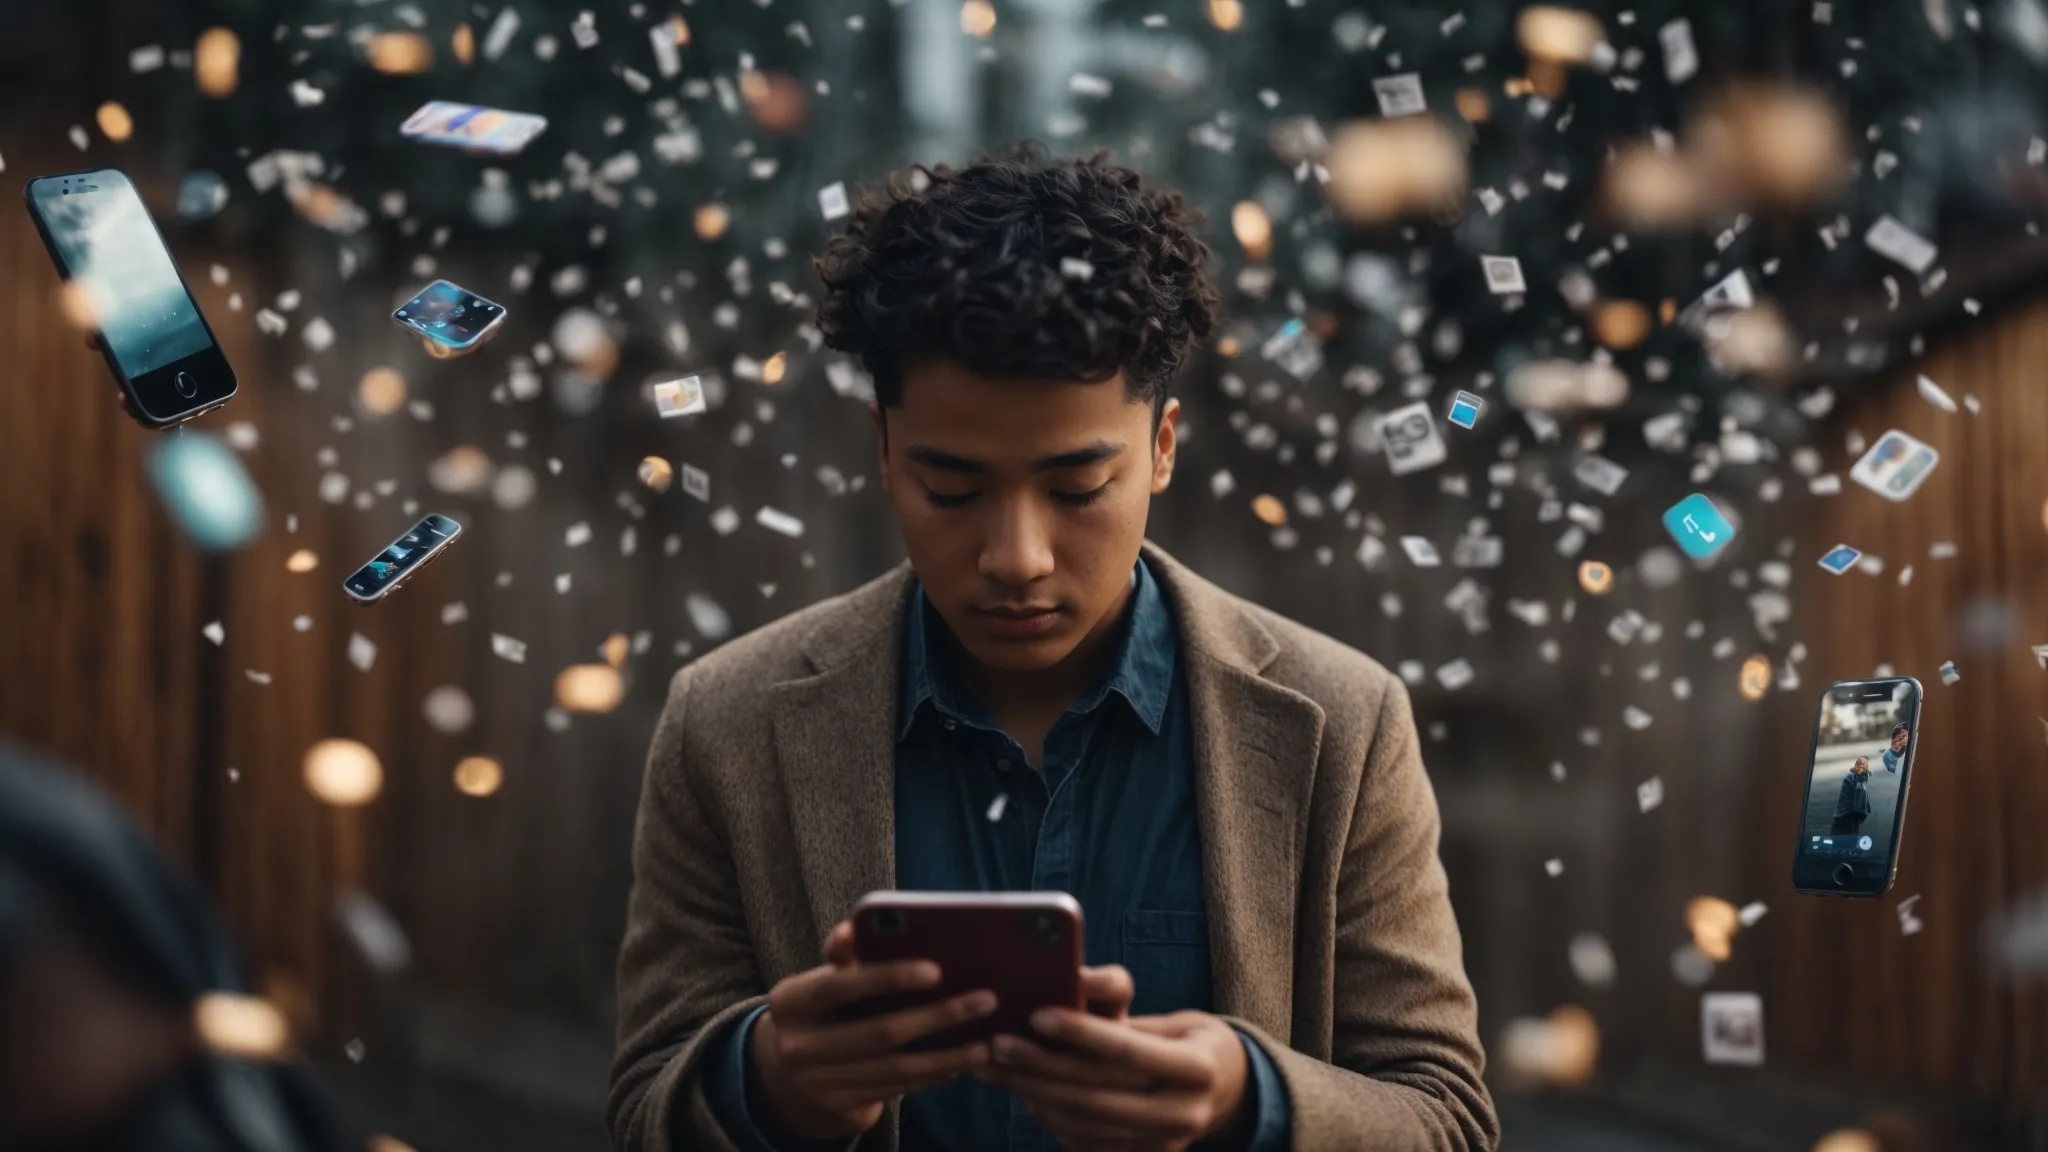 a person looks perplexed staring at their iphone screen, surrounded by various messaging and call icons floating in the air.